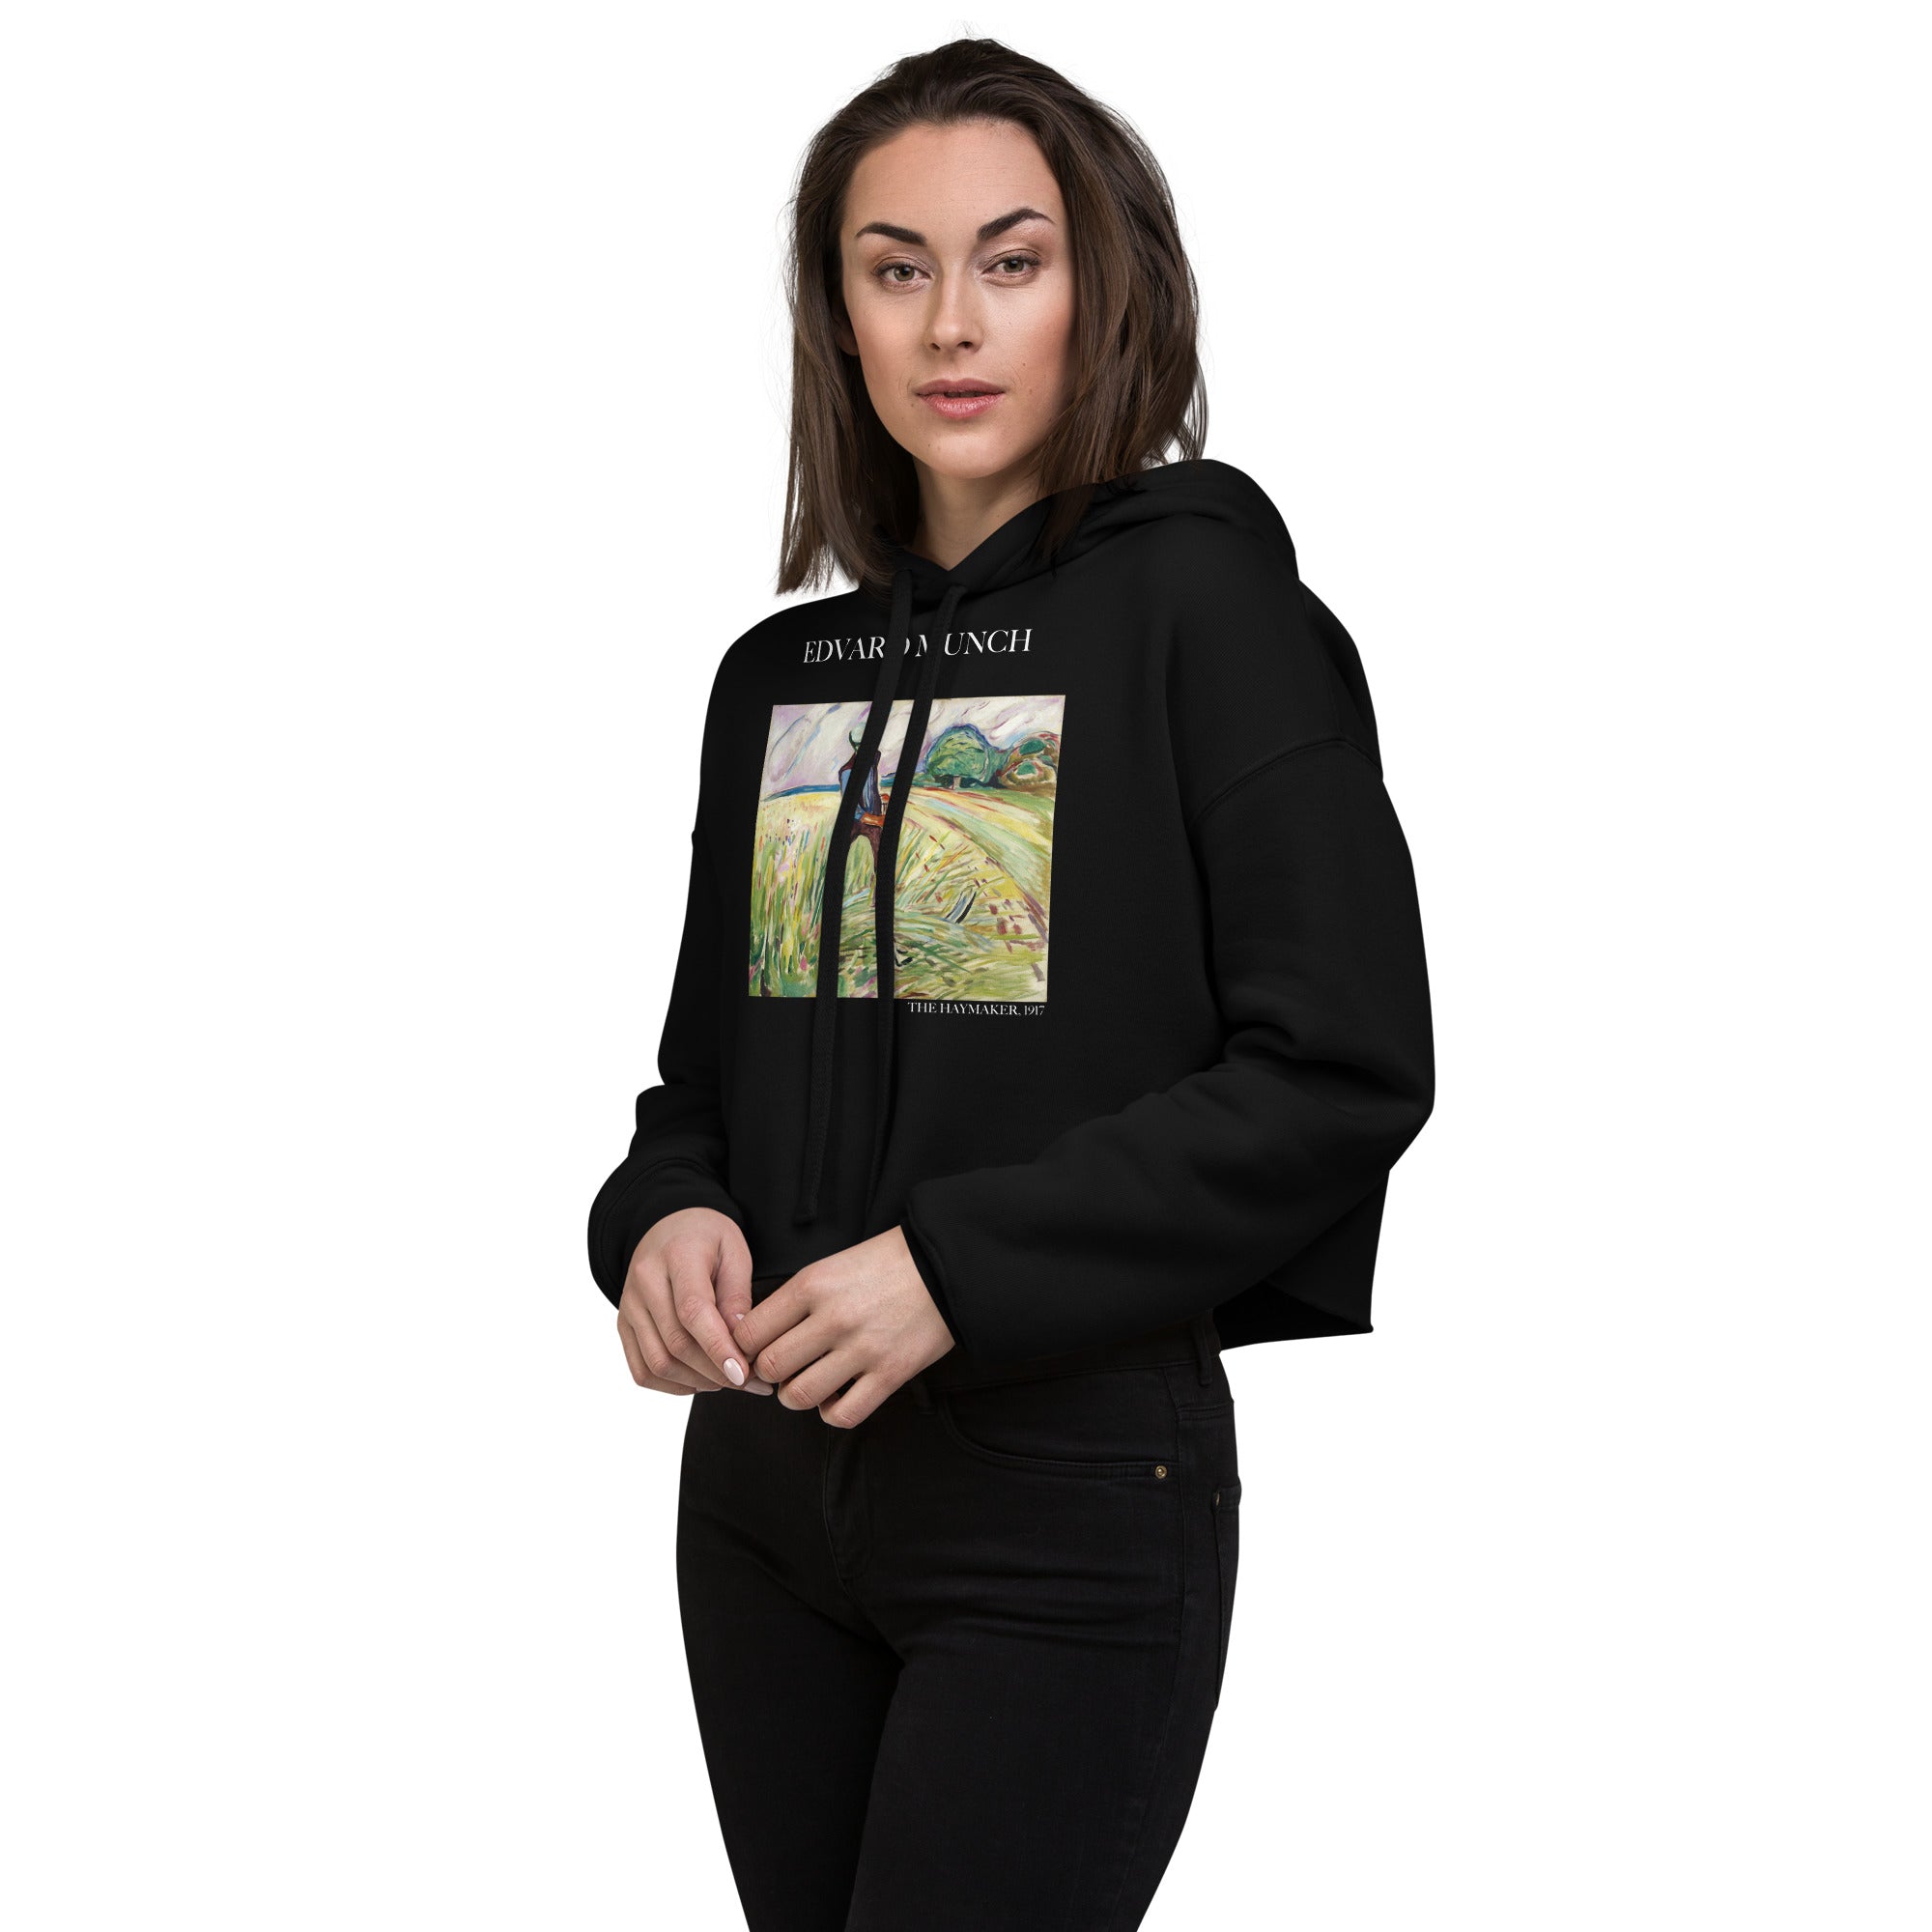 Edvard Munch 'The Haymaker' Famous Painting Cropped Hoodie | Premium Art Cropped Hoodie